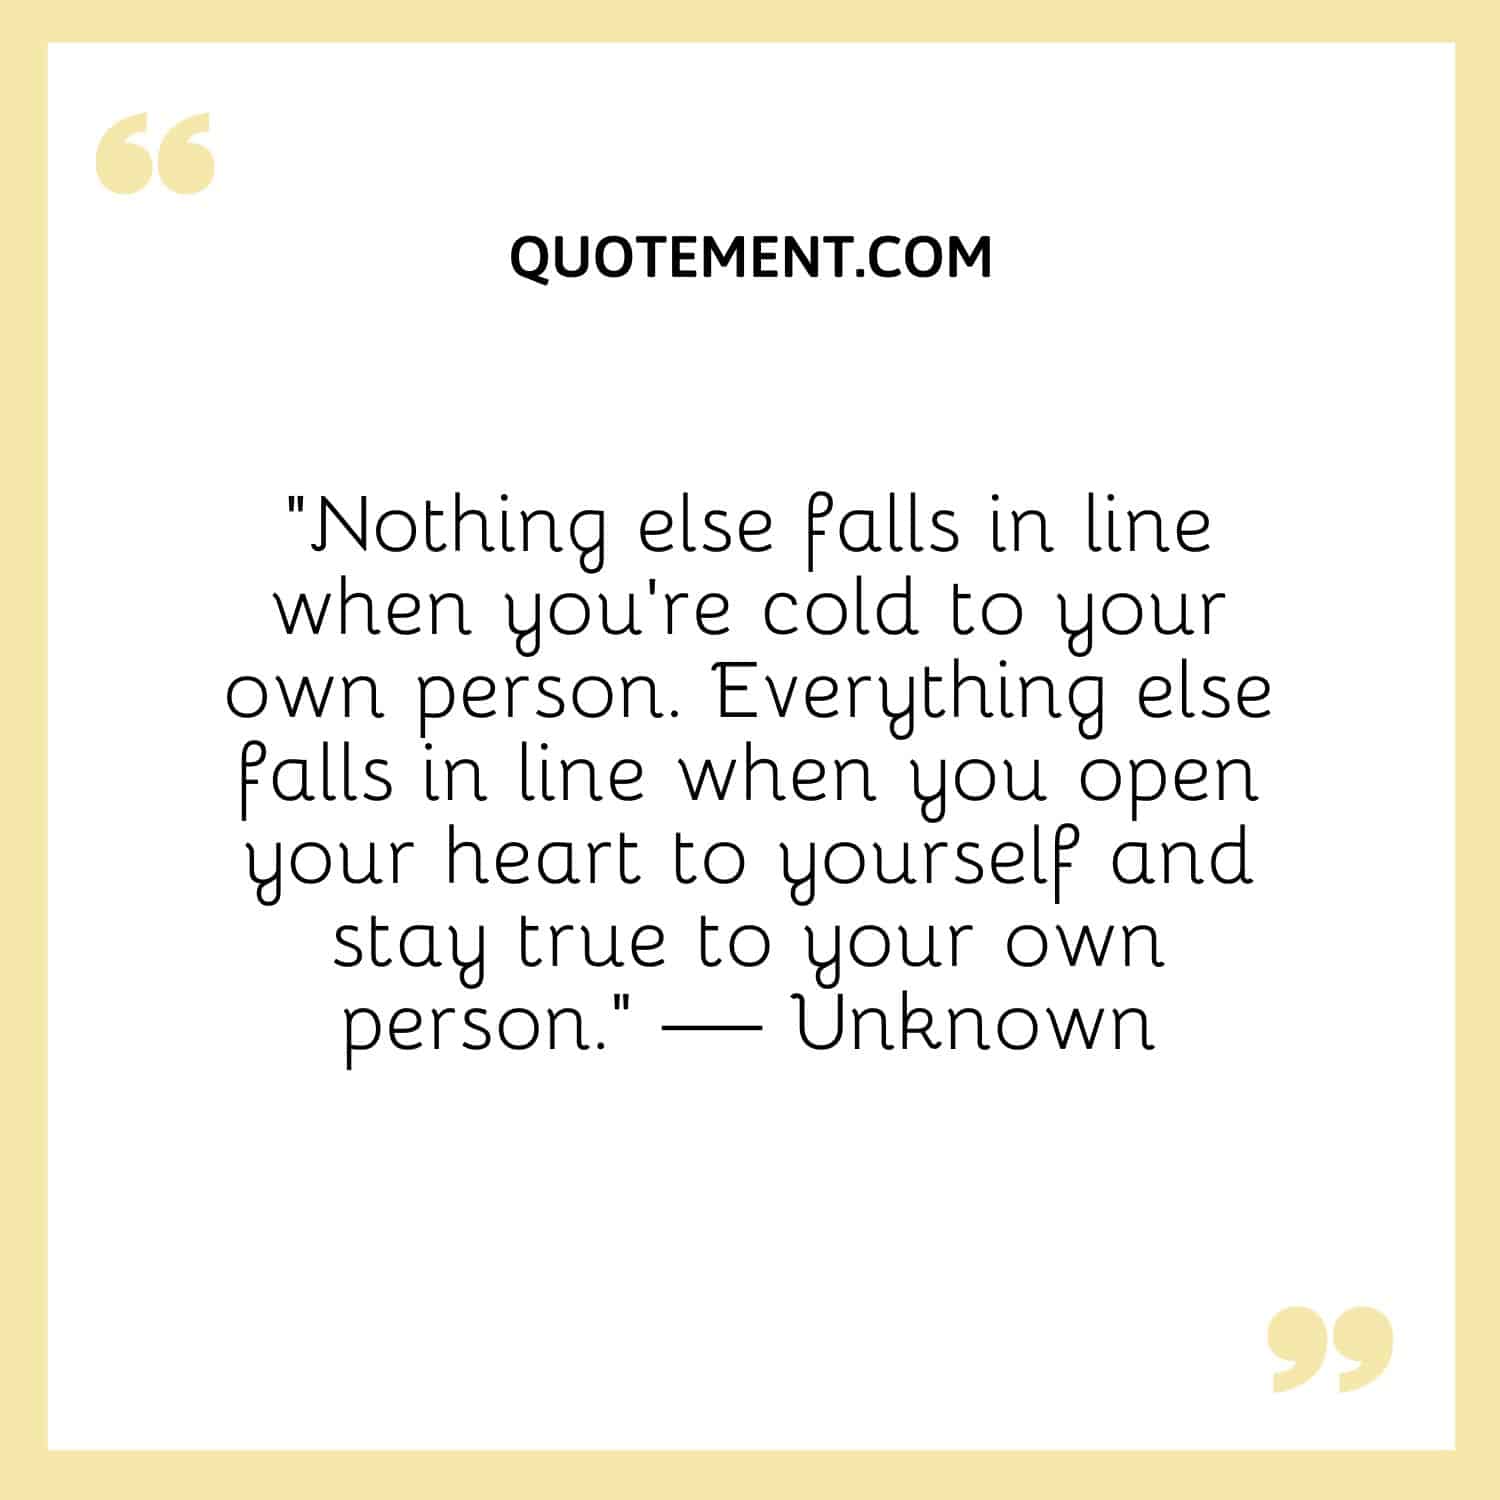 Nothing else falls in line when you’re cold to your own person